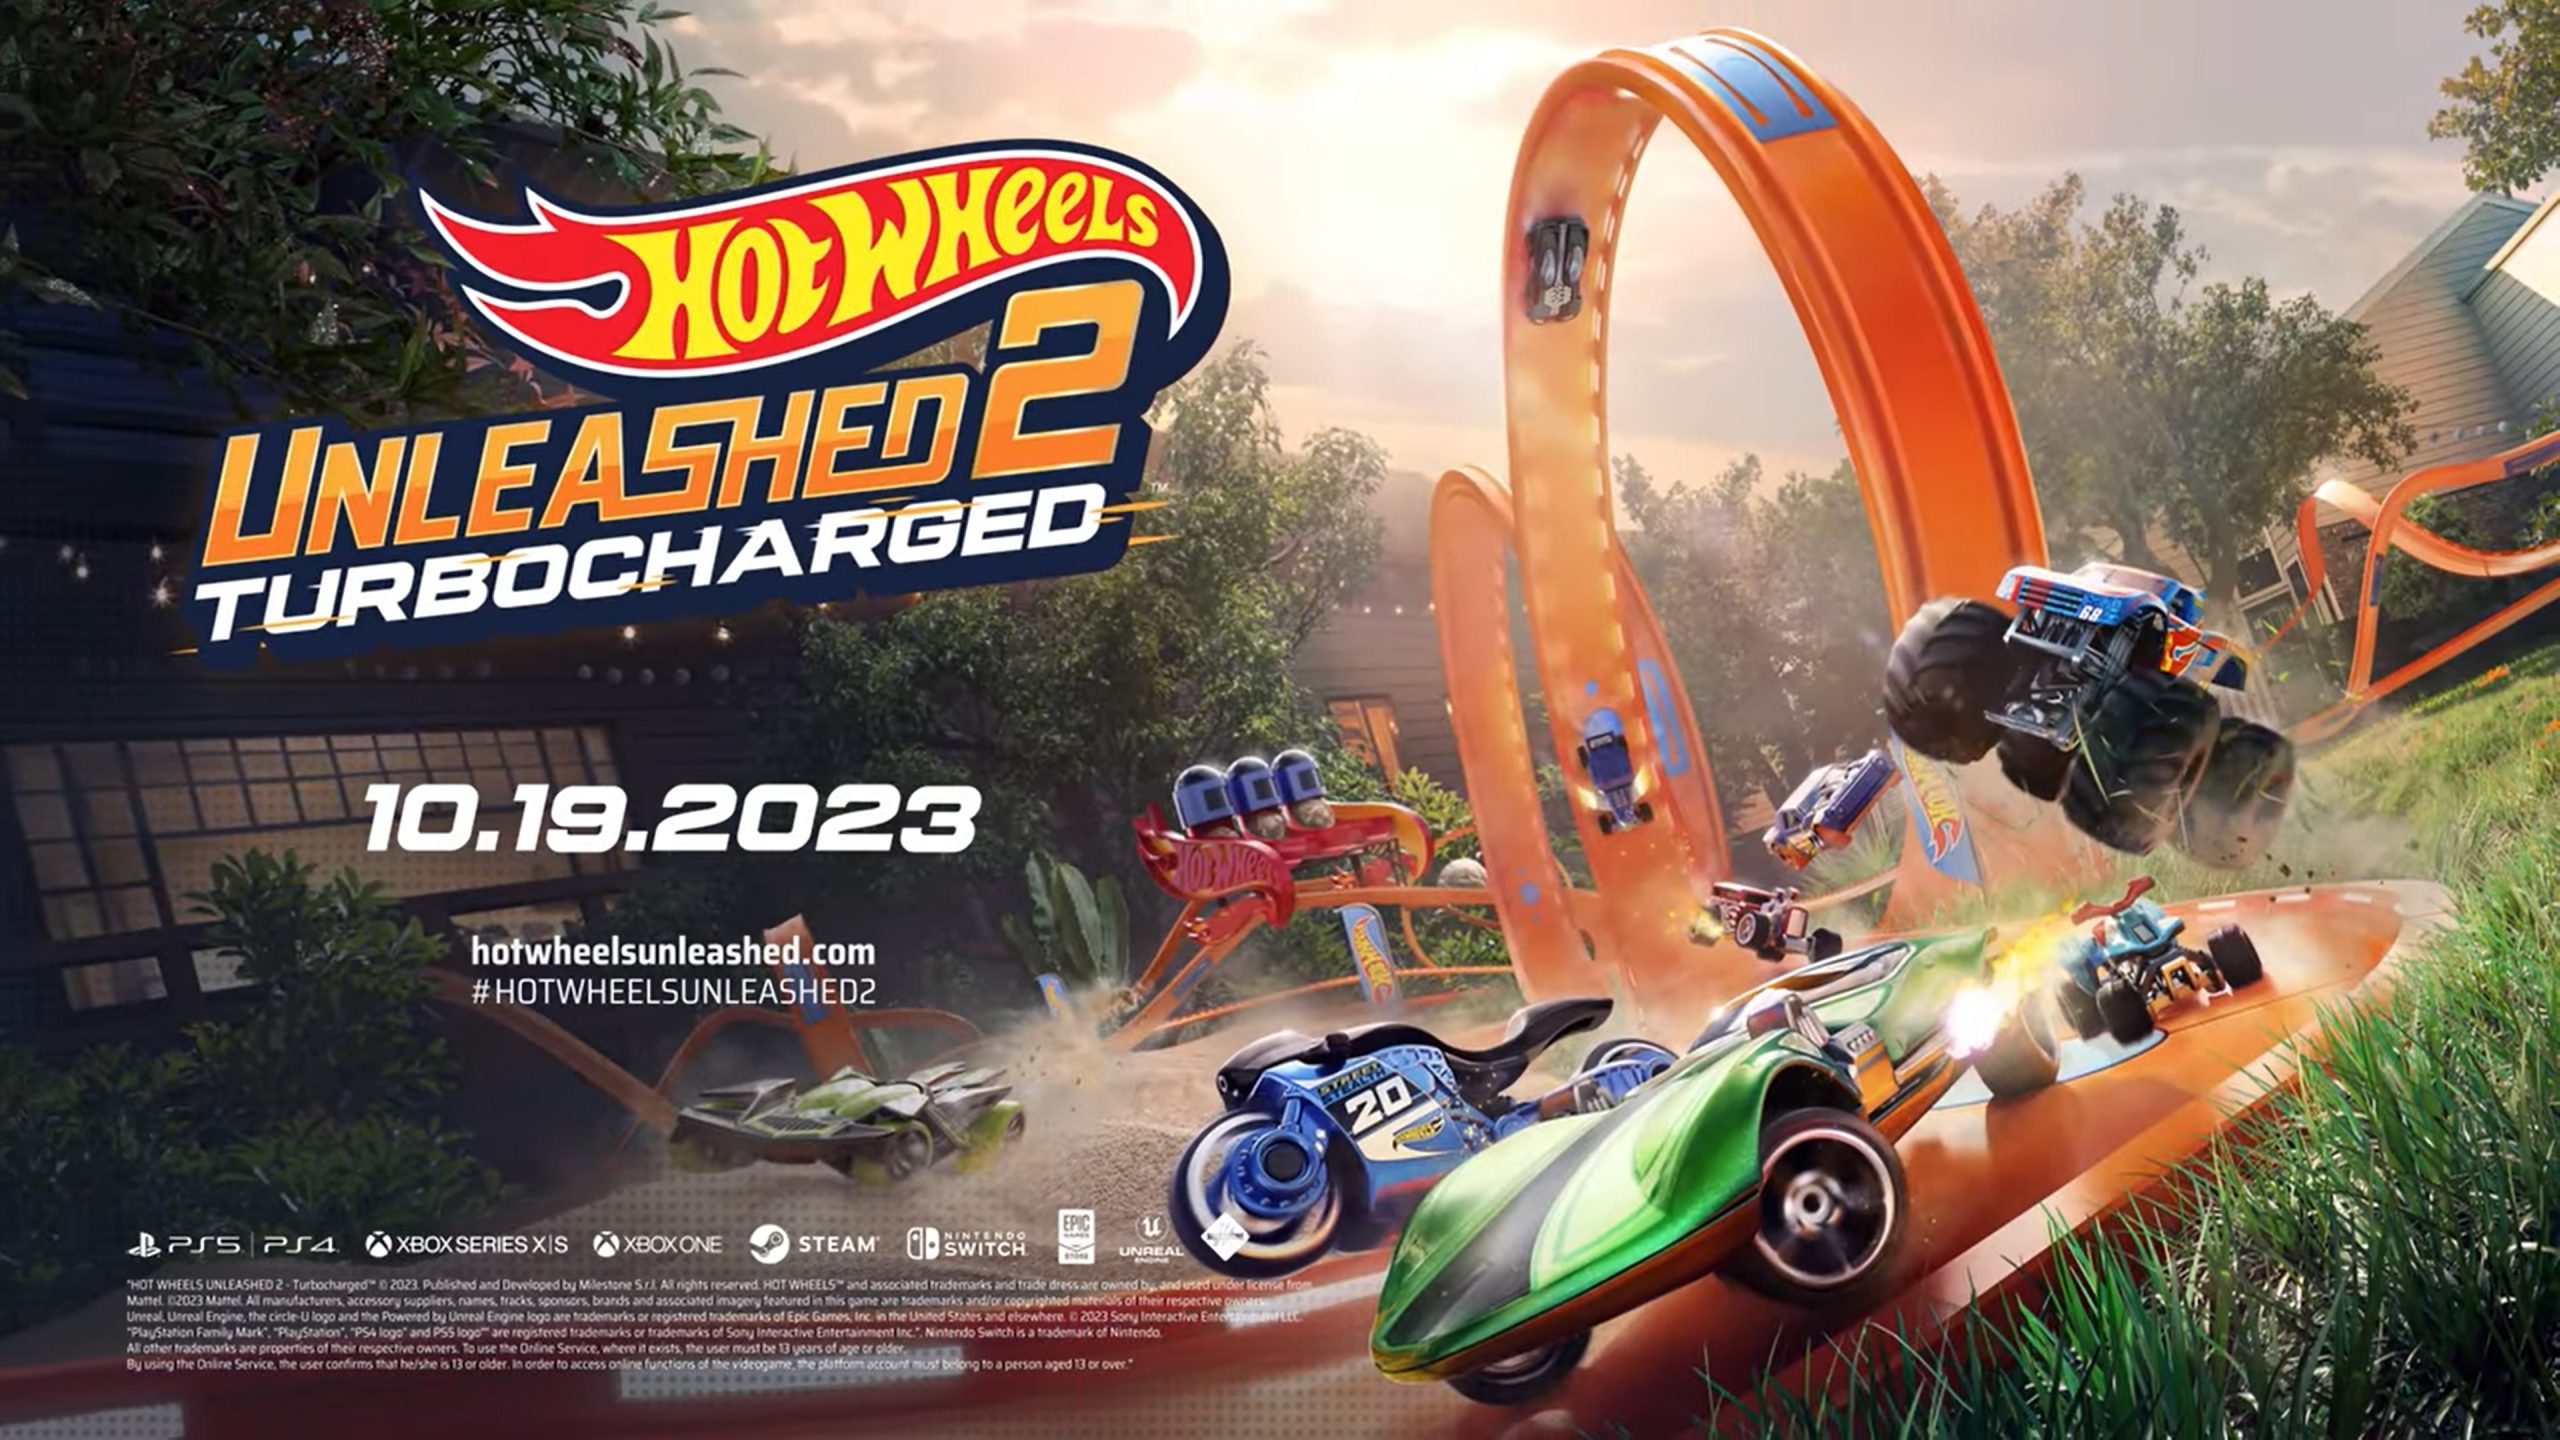 Hot Wheels Unleashed 2 – Turbocharged drifting in October